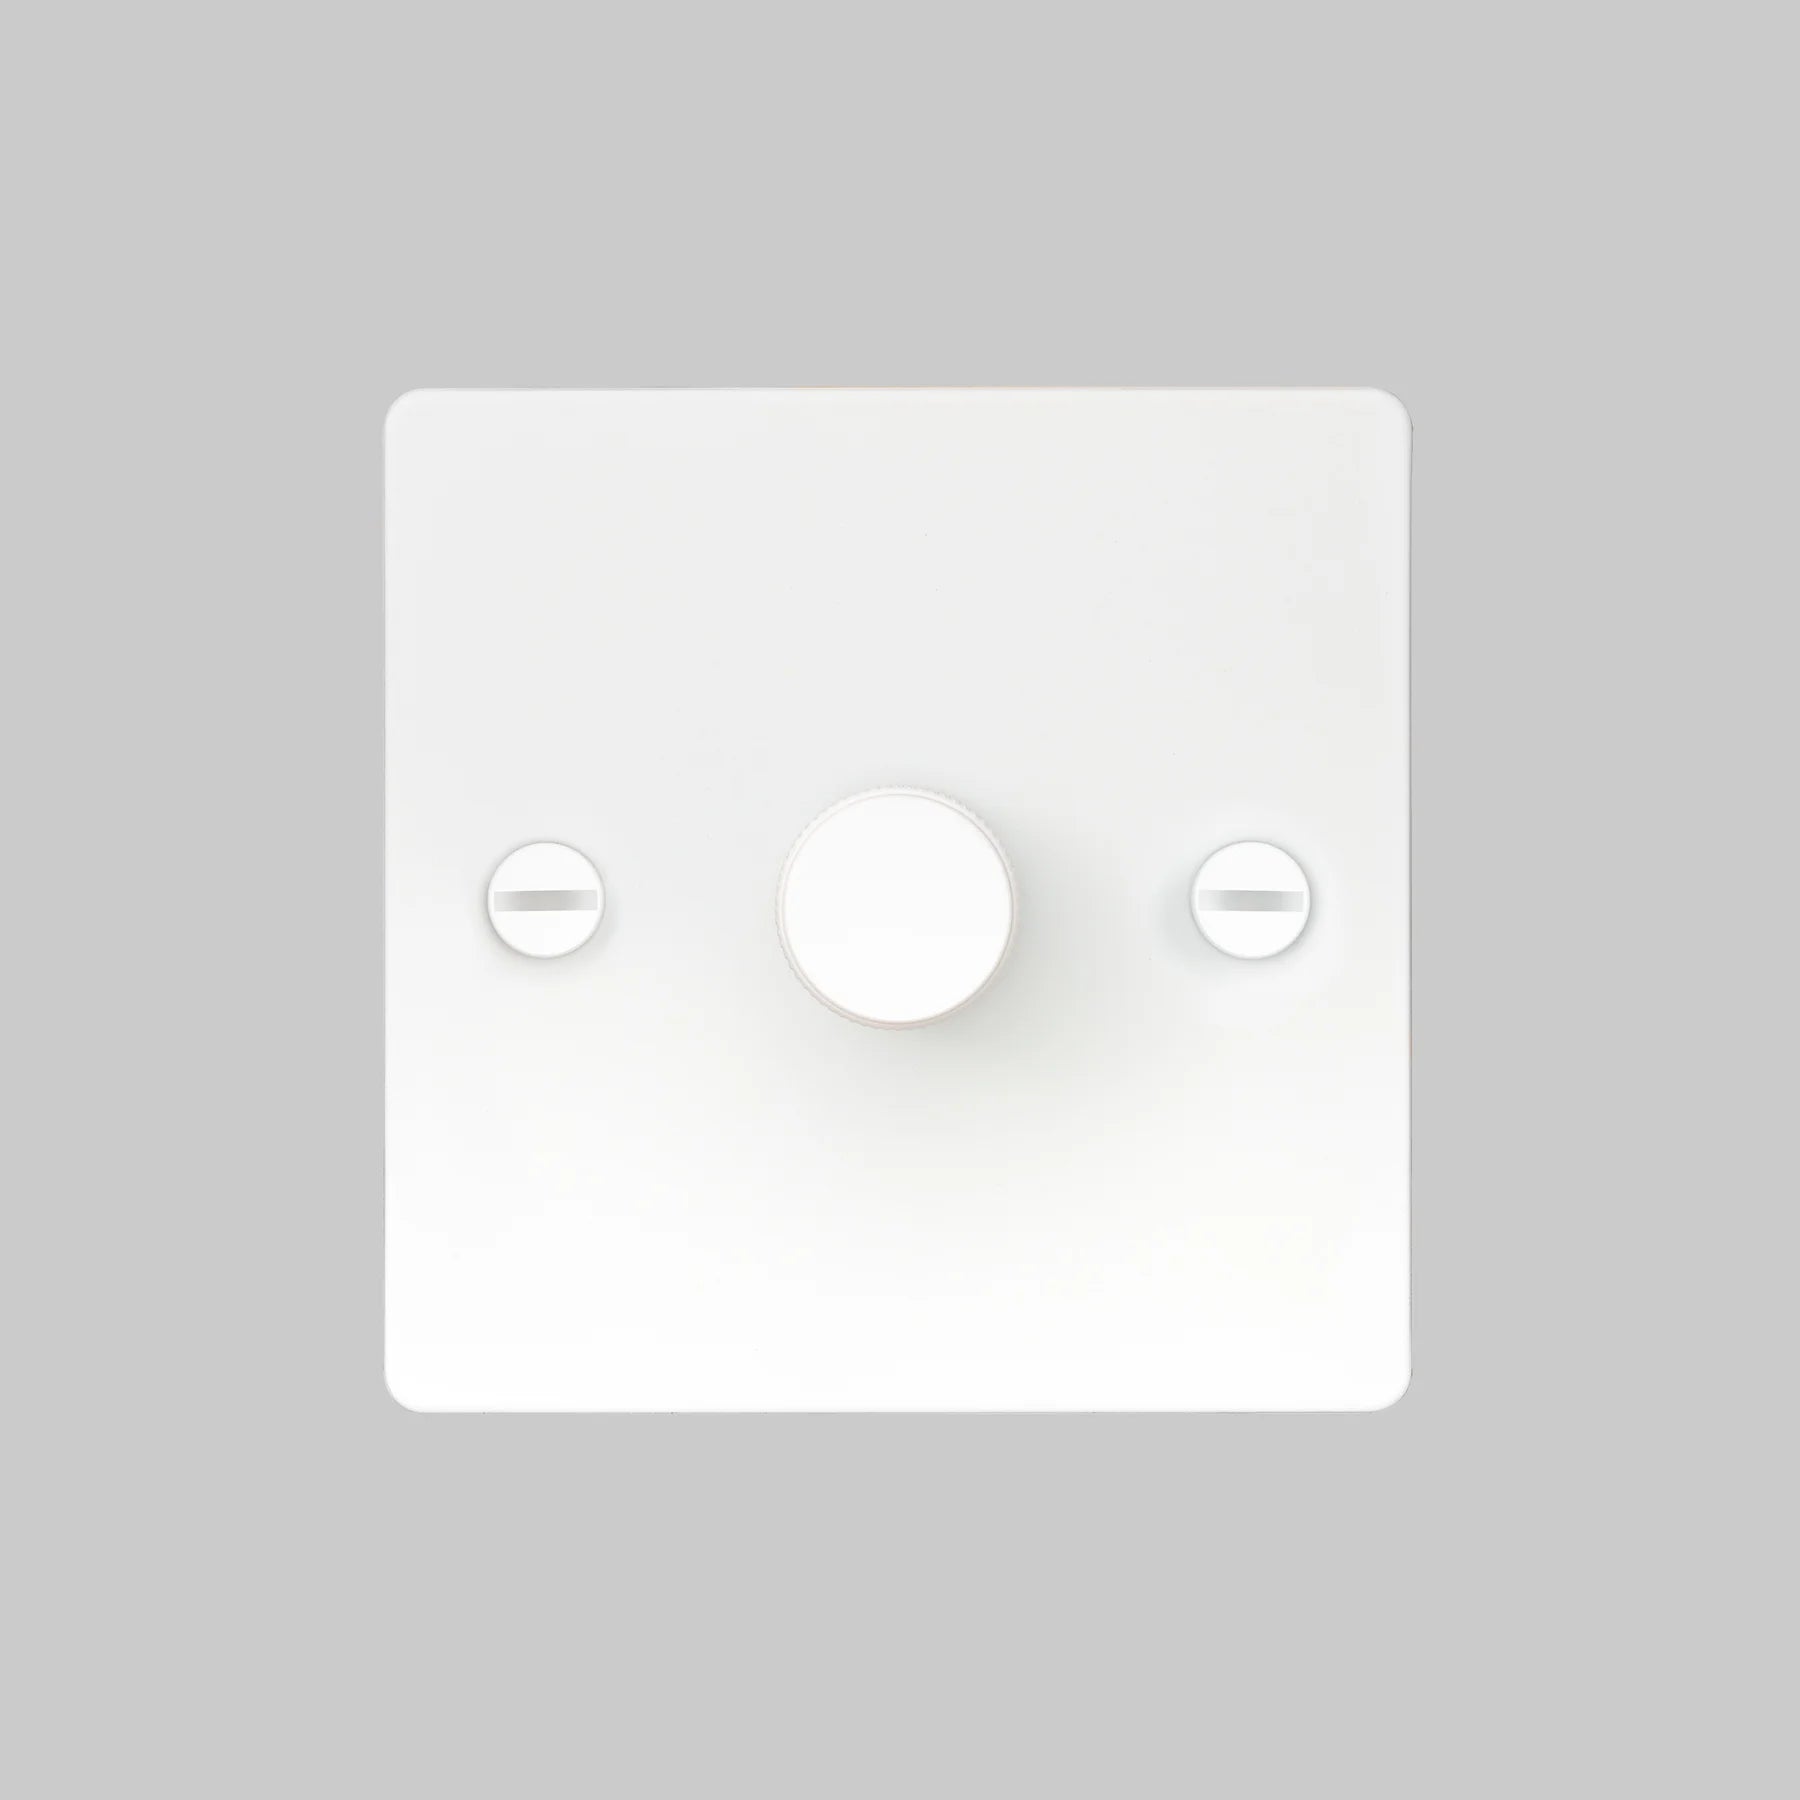 1G Dimmer/ 120W/ White with white details, front view.